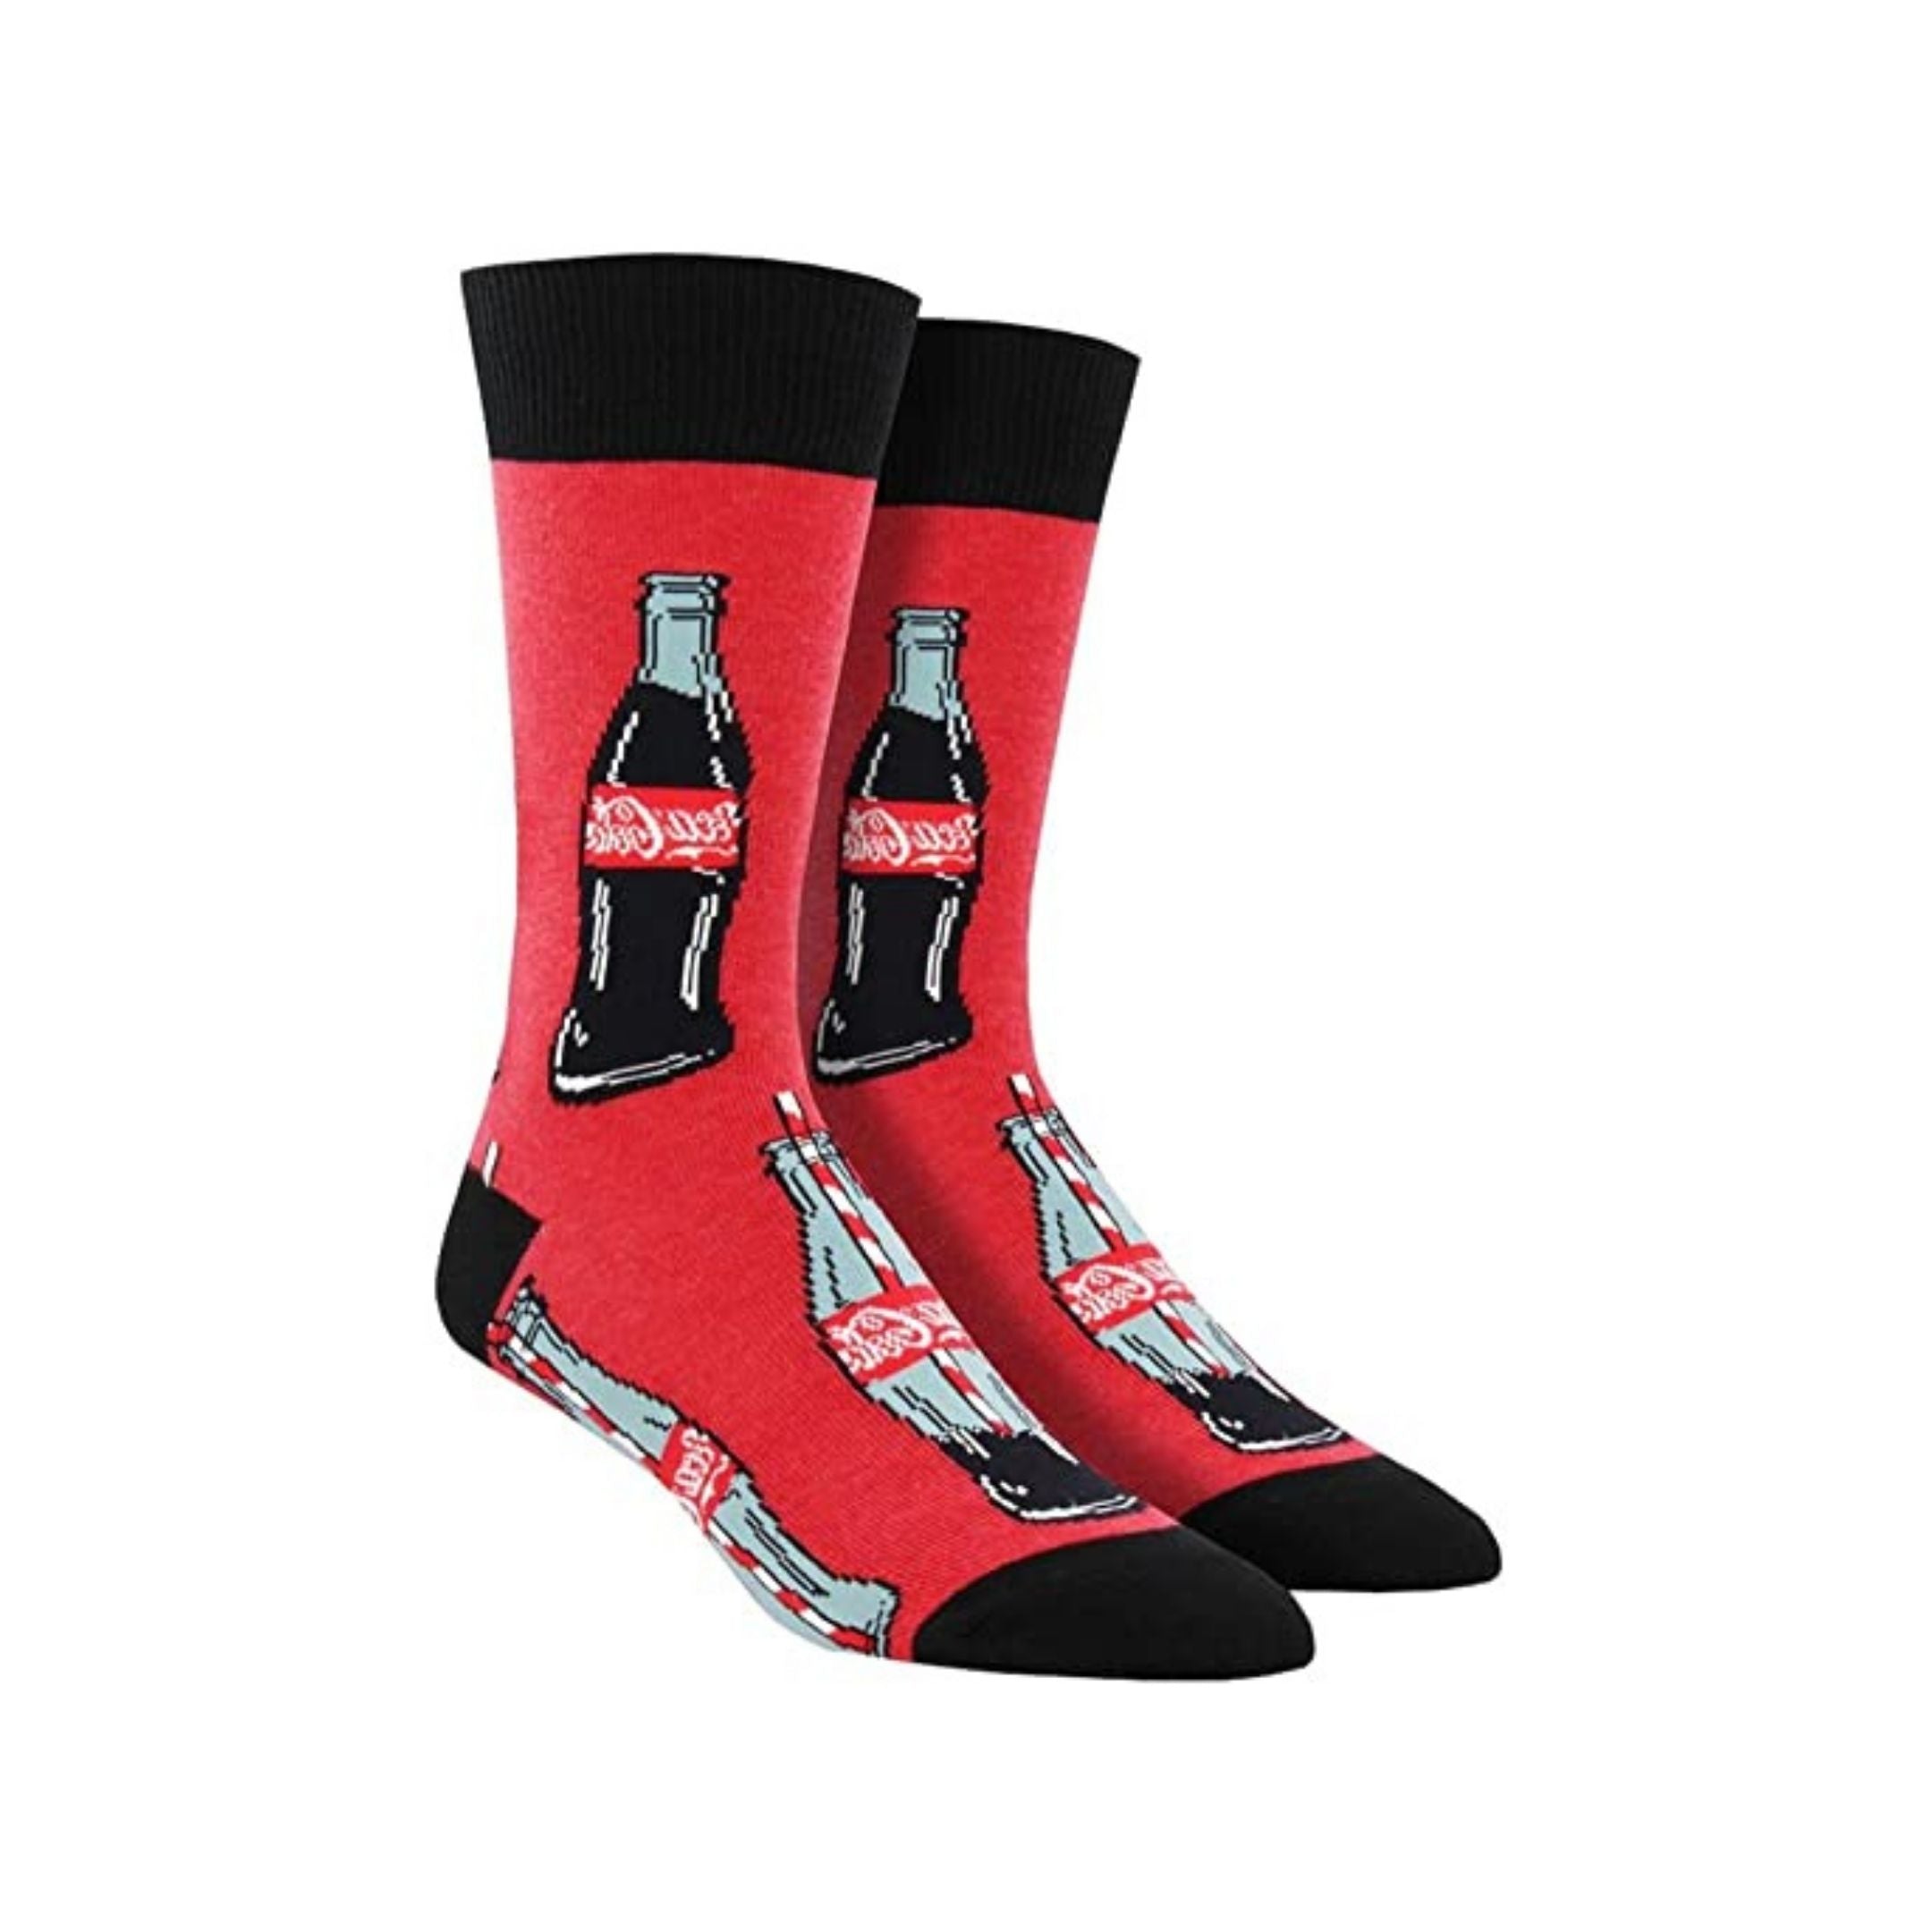 Red socks with black accents and coca cola bottles